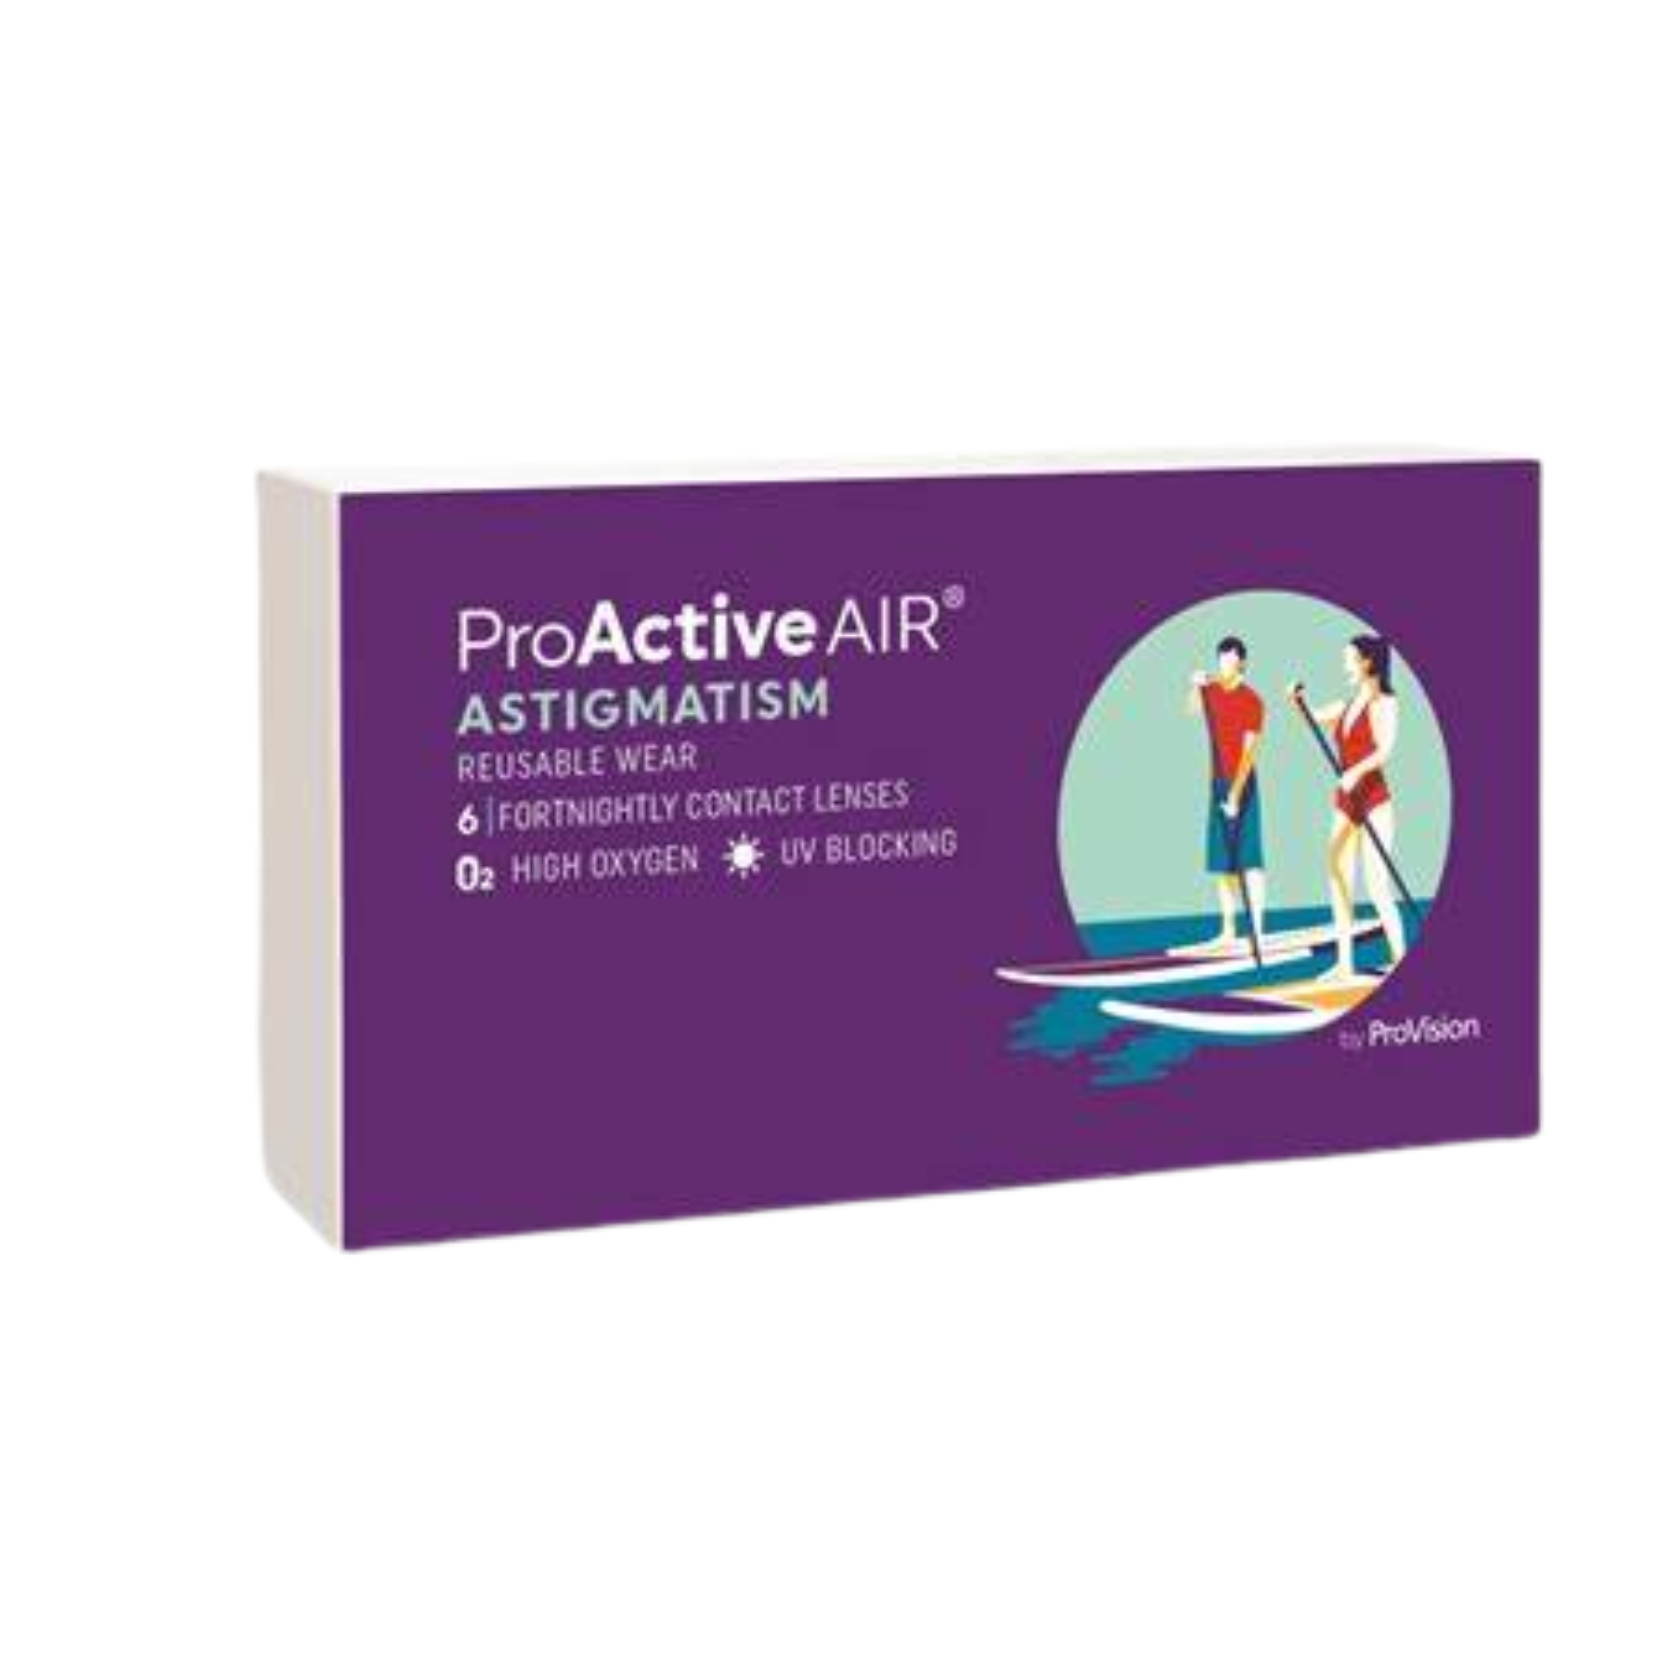 ProActive Air for Astigmatism